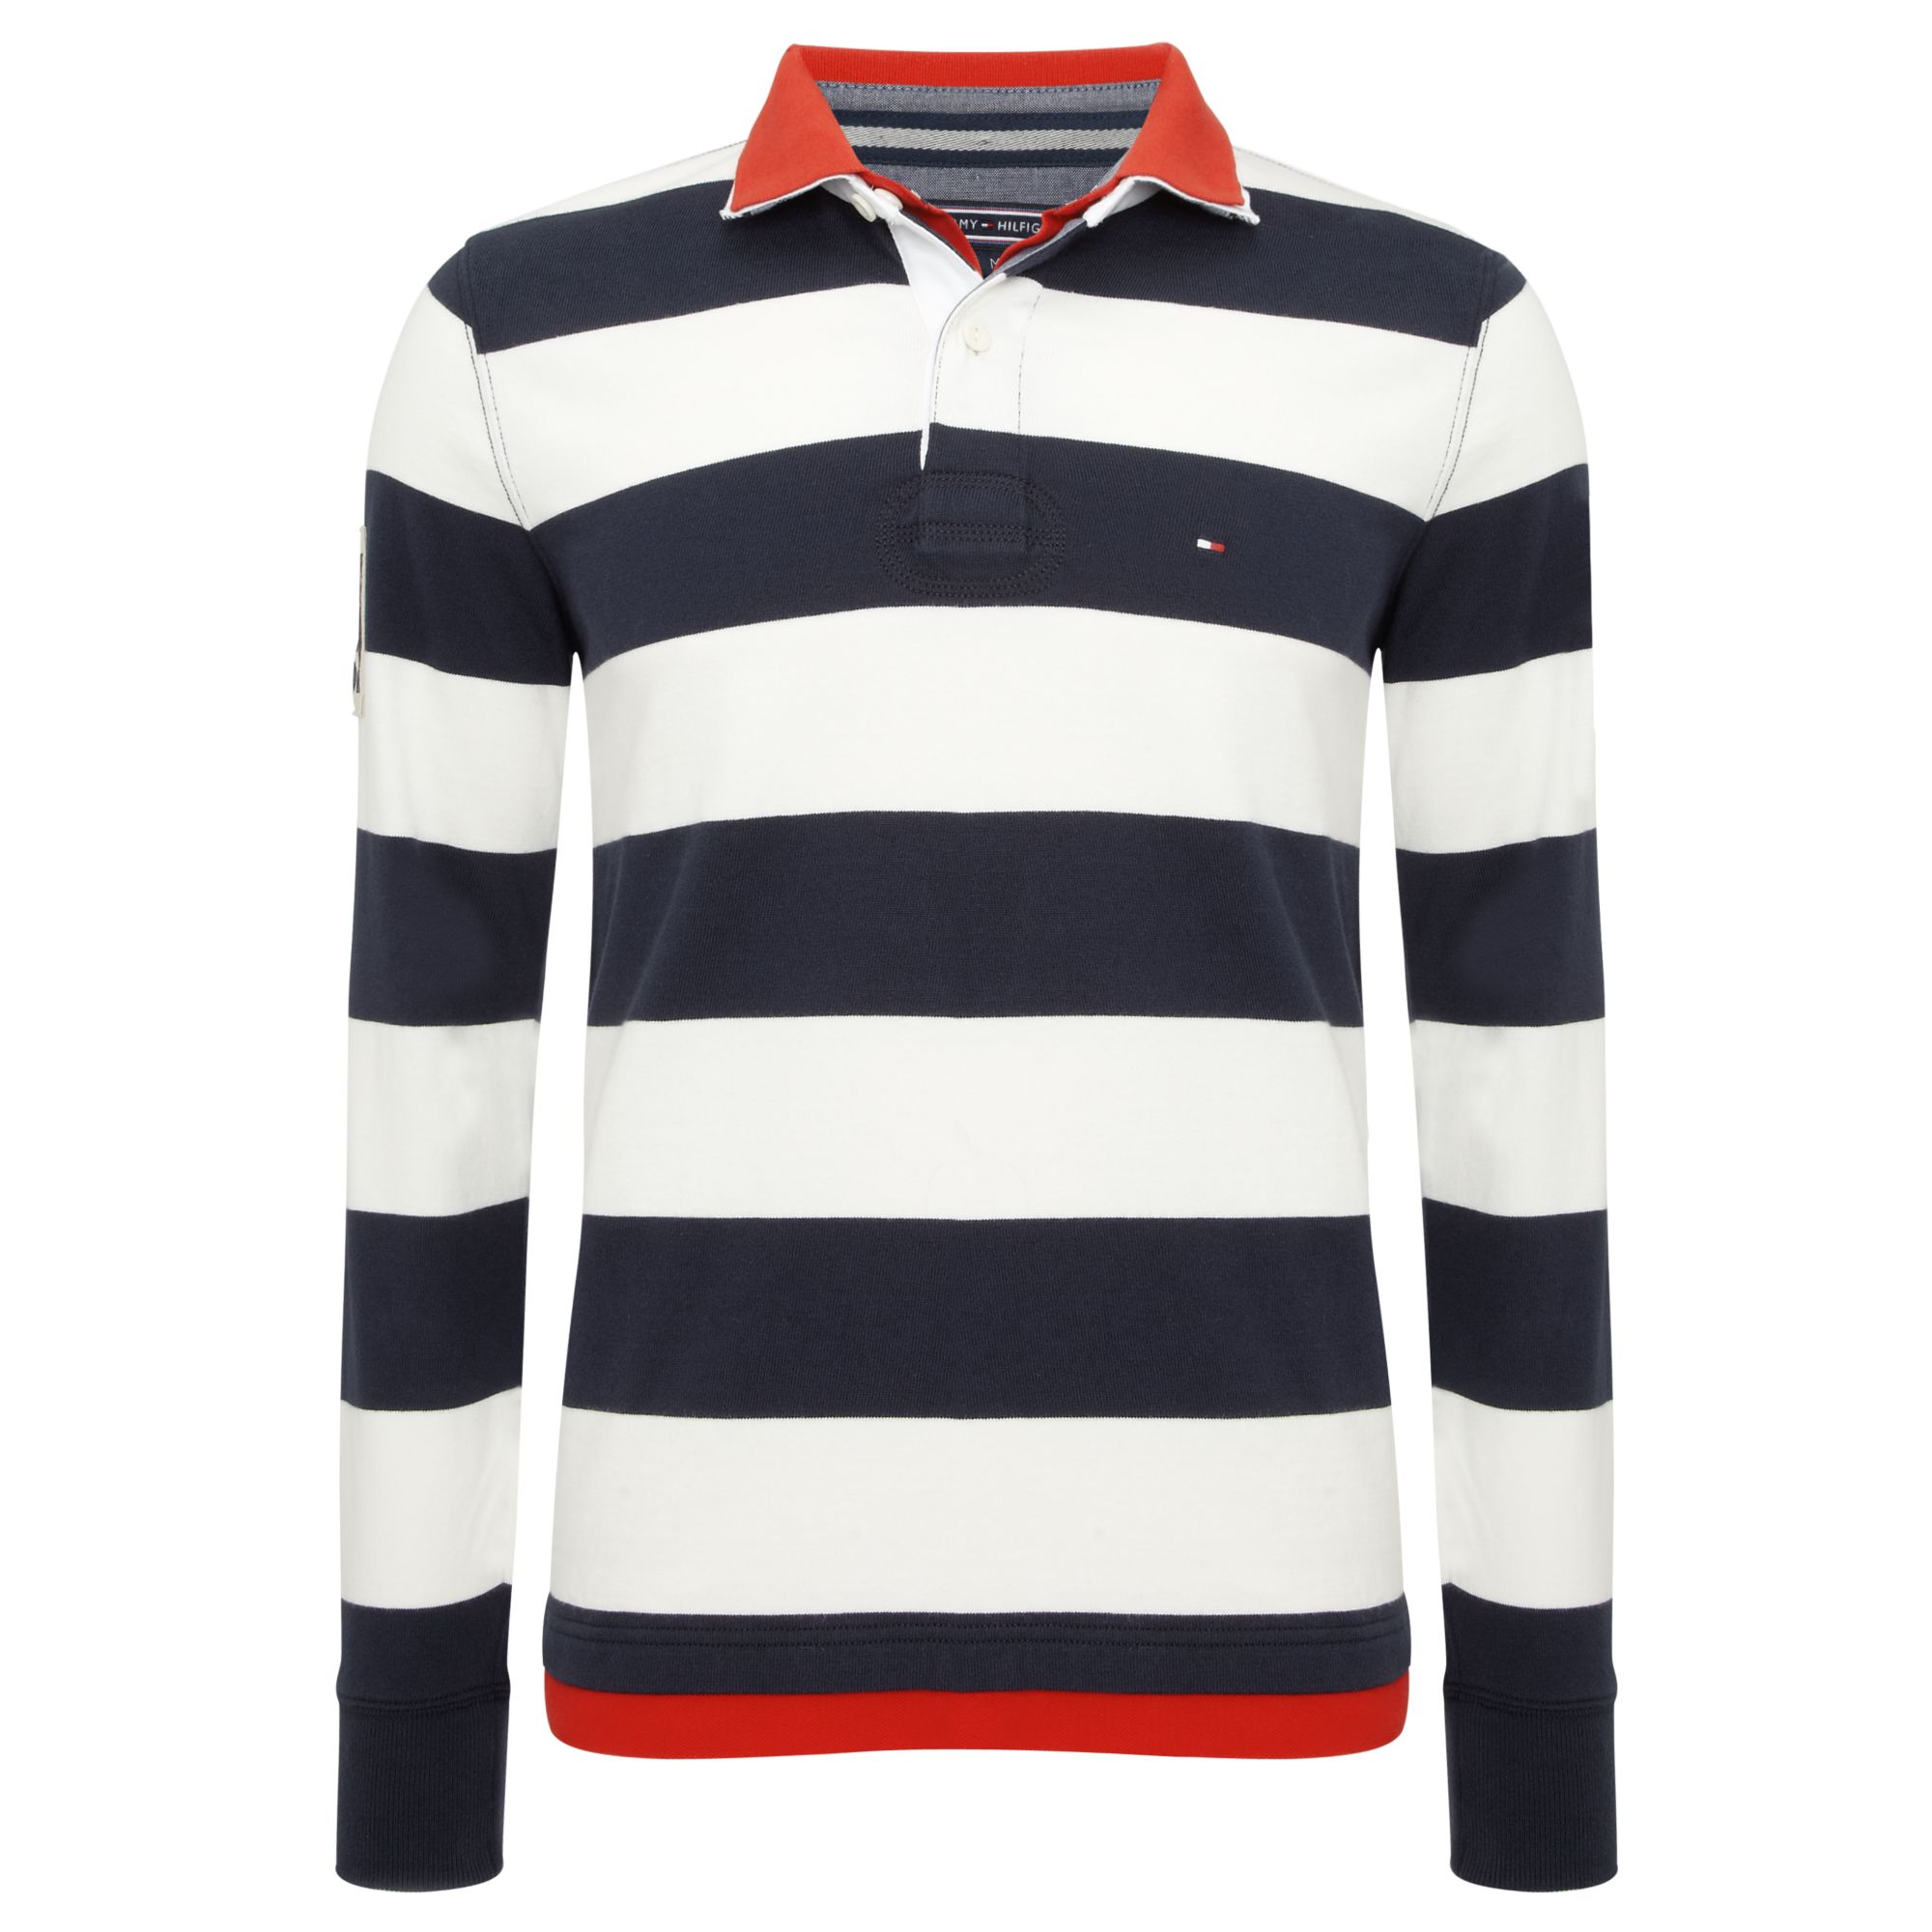 tommy rugby jumper